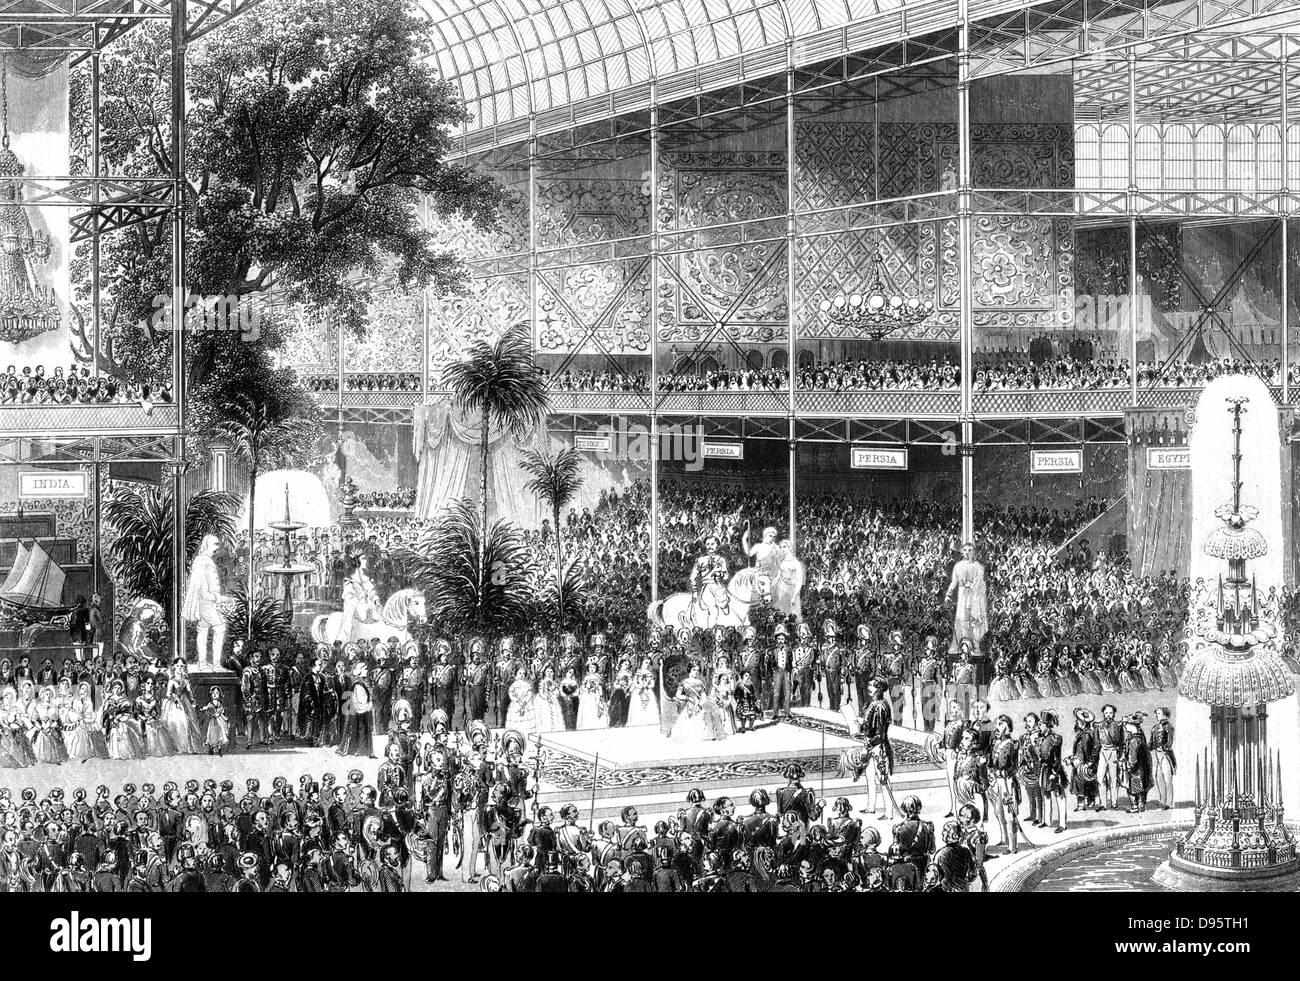 Great Exhibition, Crystal Palace, London. Queen Victoria opening exhibition 1 May 1851. Engraving. Stock Photo